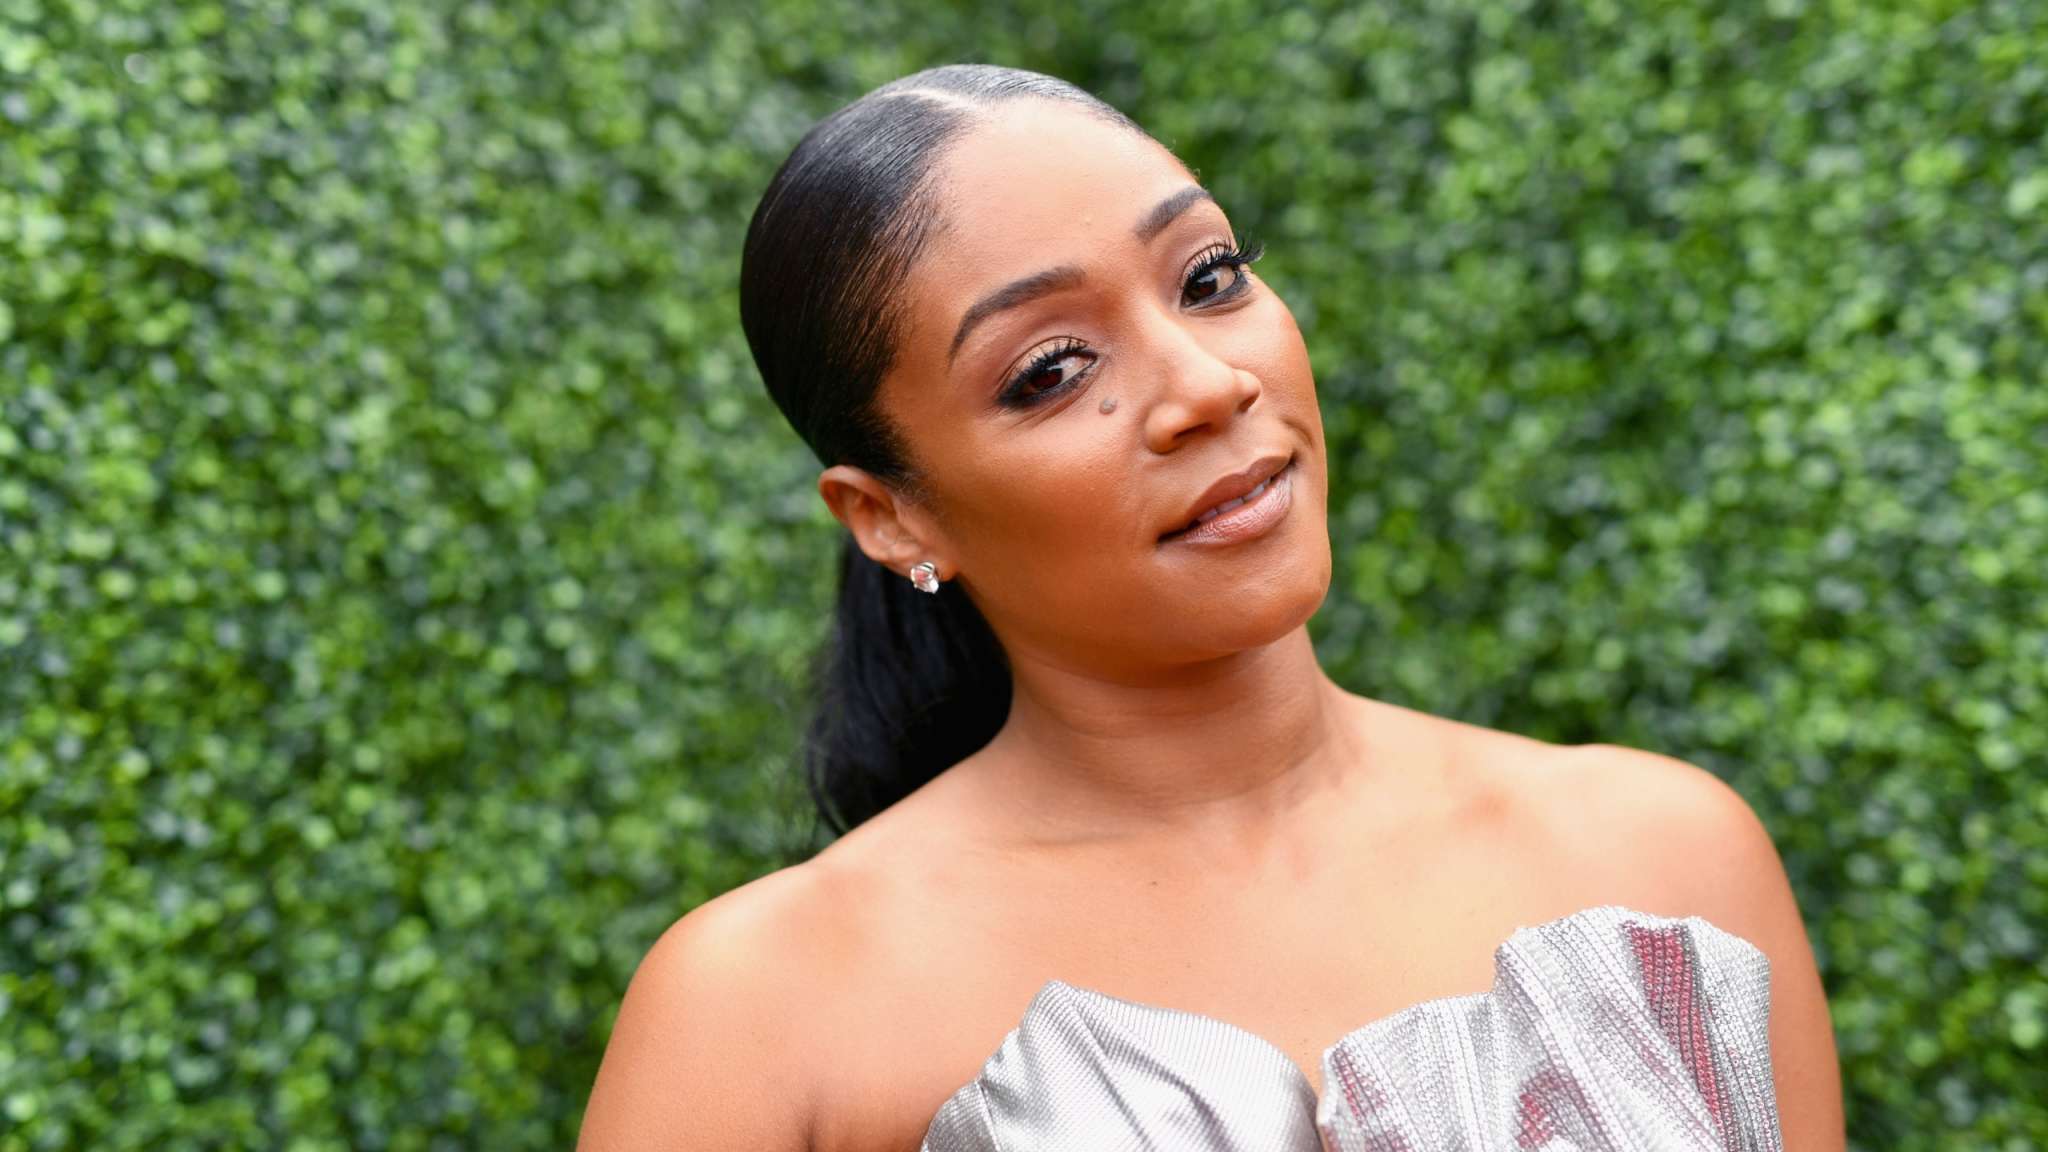 tiffany-haddish-is-faced-with-dui-charges-check-out-what-happened-that-got-her-in-trouble